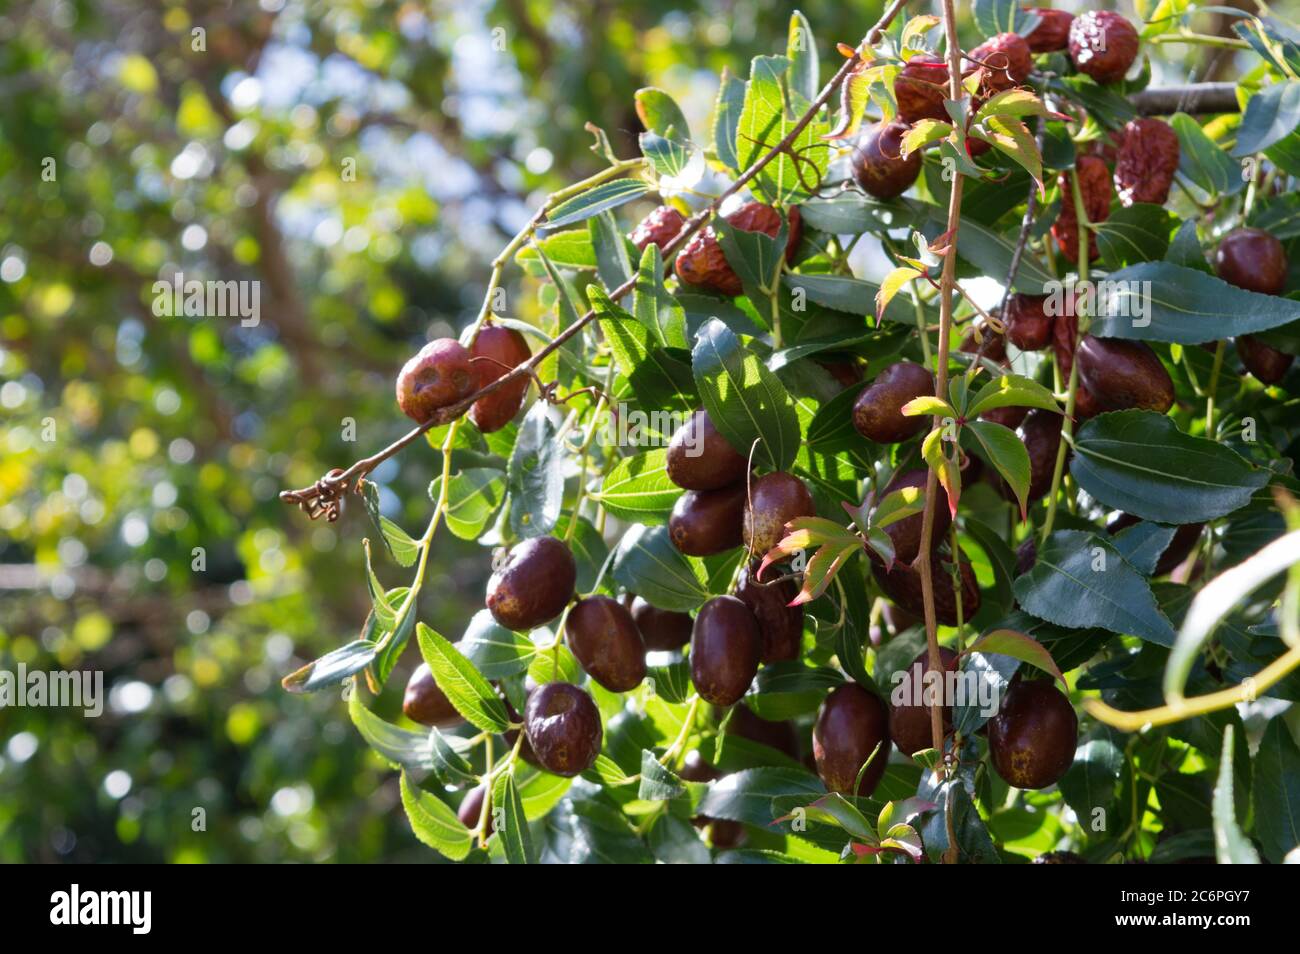 Mediterranean tree with fruits, Ziziphus jujuba, called chinese date or red date Stock Photo